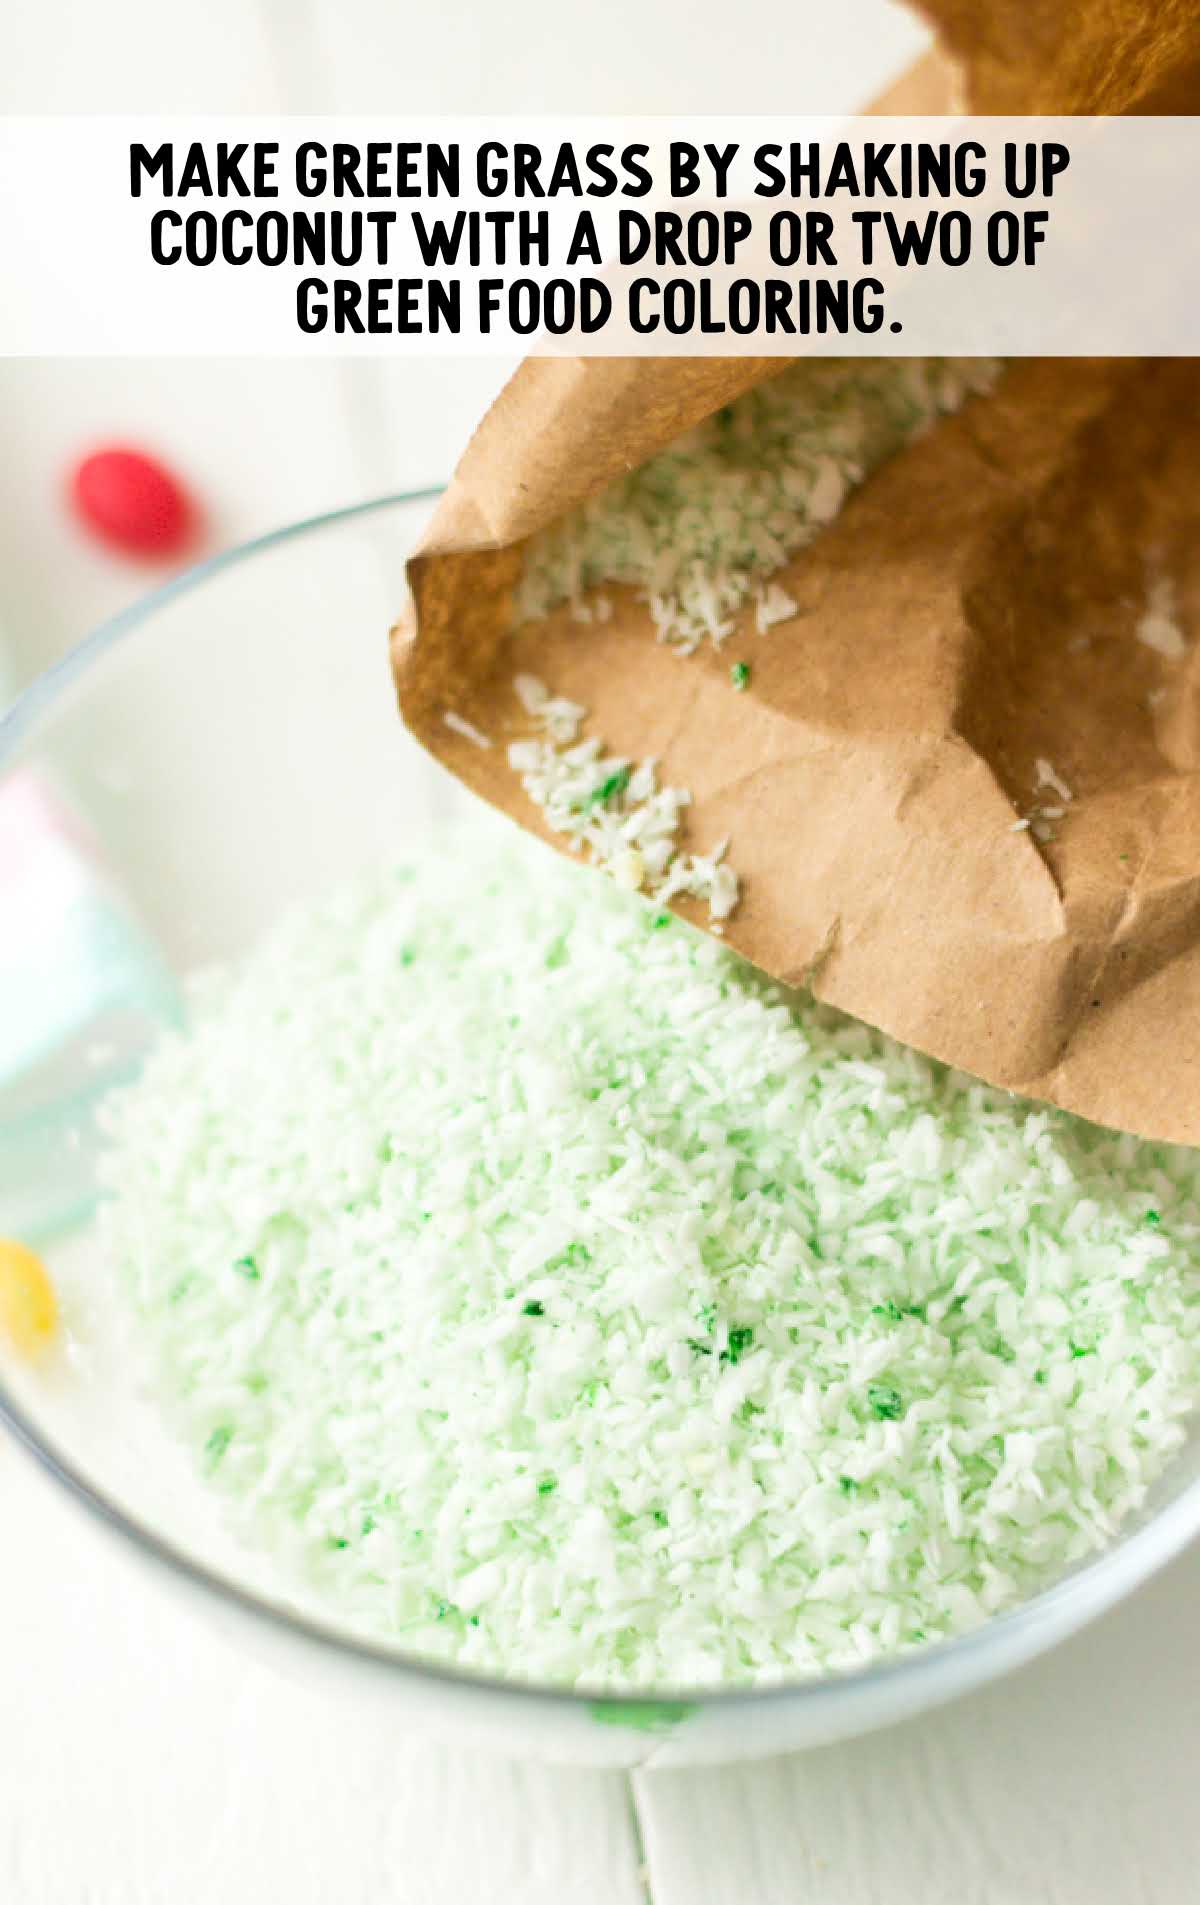 shredded coconut mixed with green food coloring to make grass